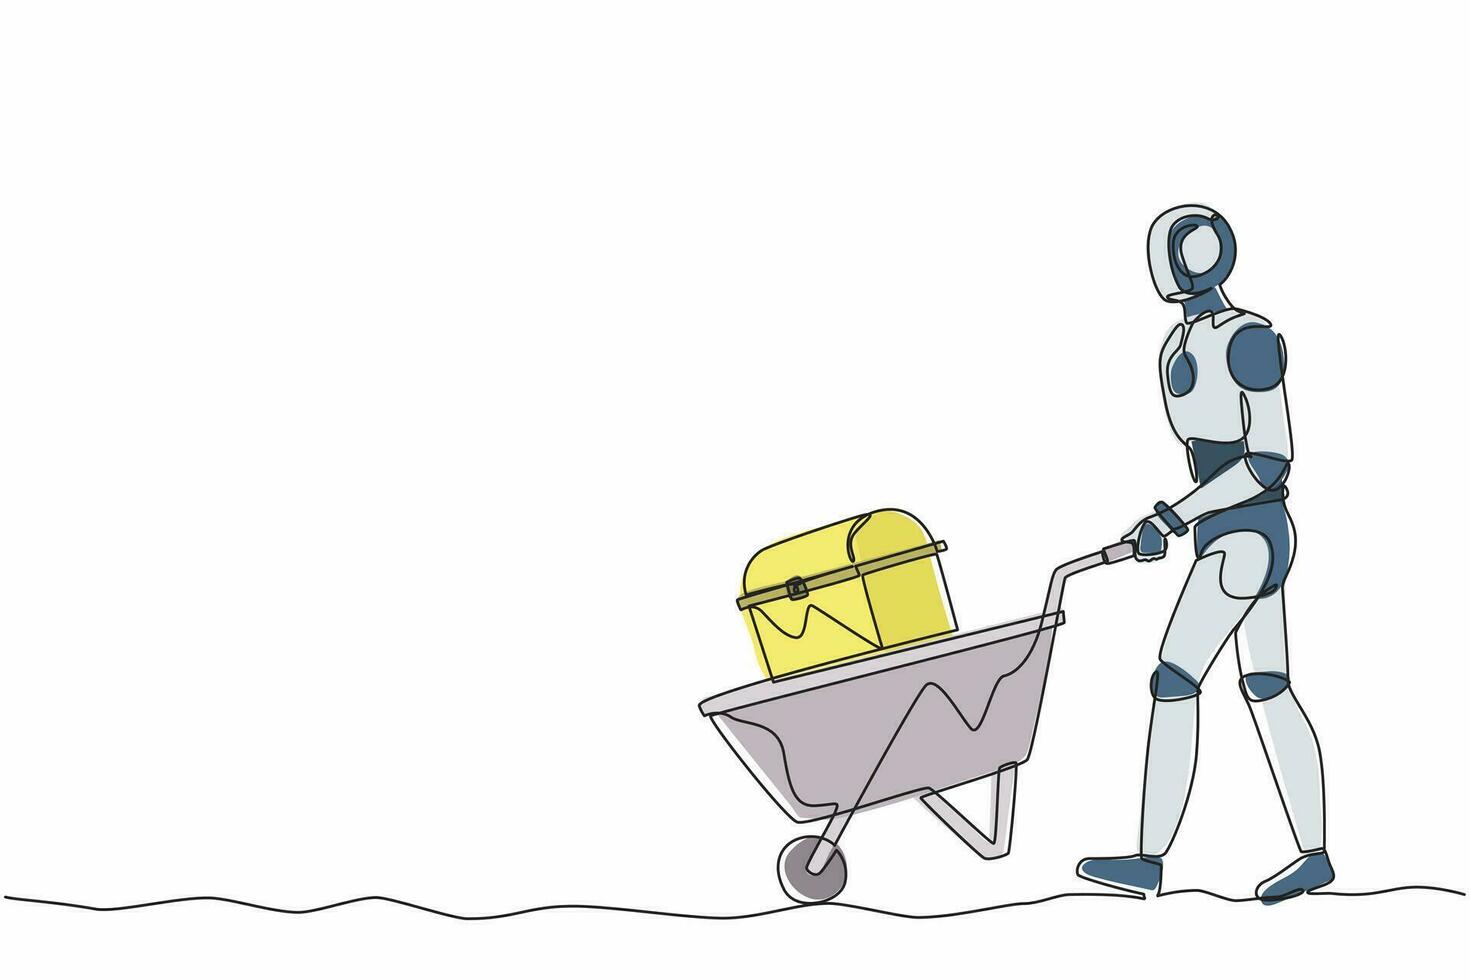 Single one line drawing robot walking and pushing trolley with chest treasure. Future technology development. Artificial intelligence and machine learning. Continuous line design vector illustration